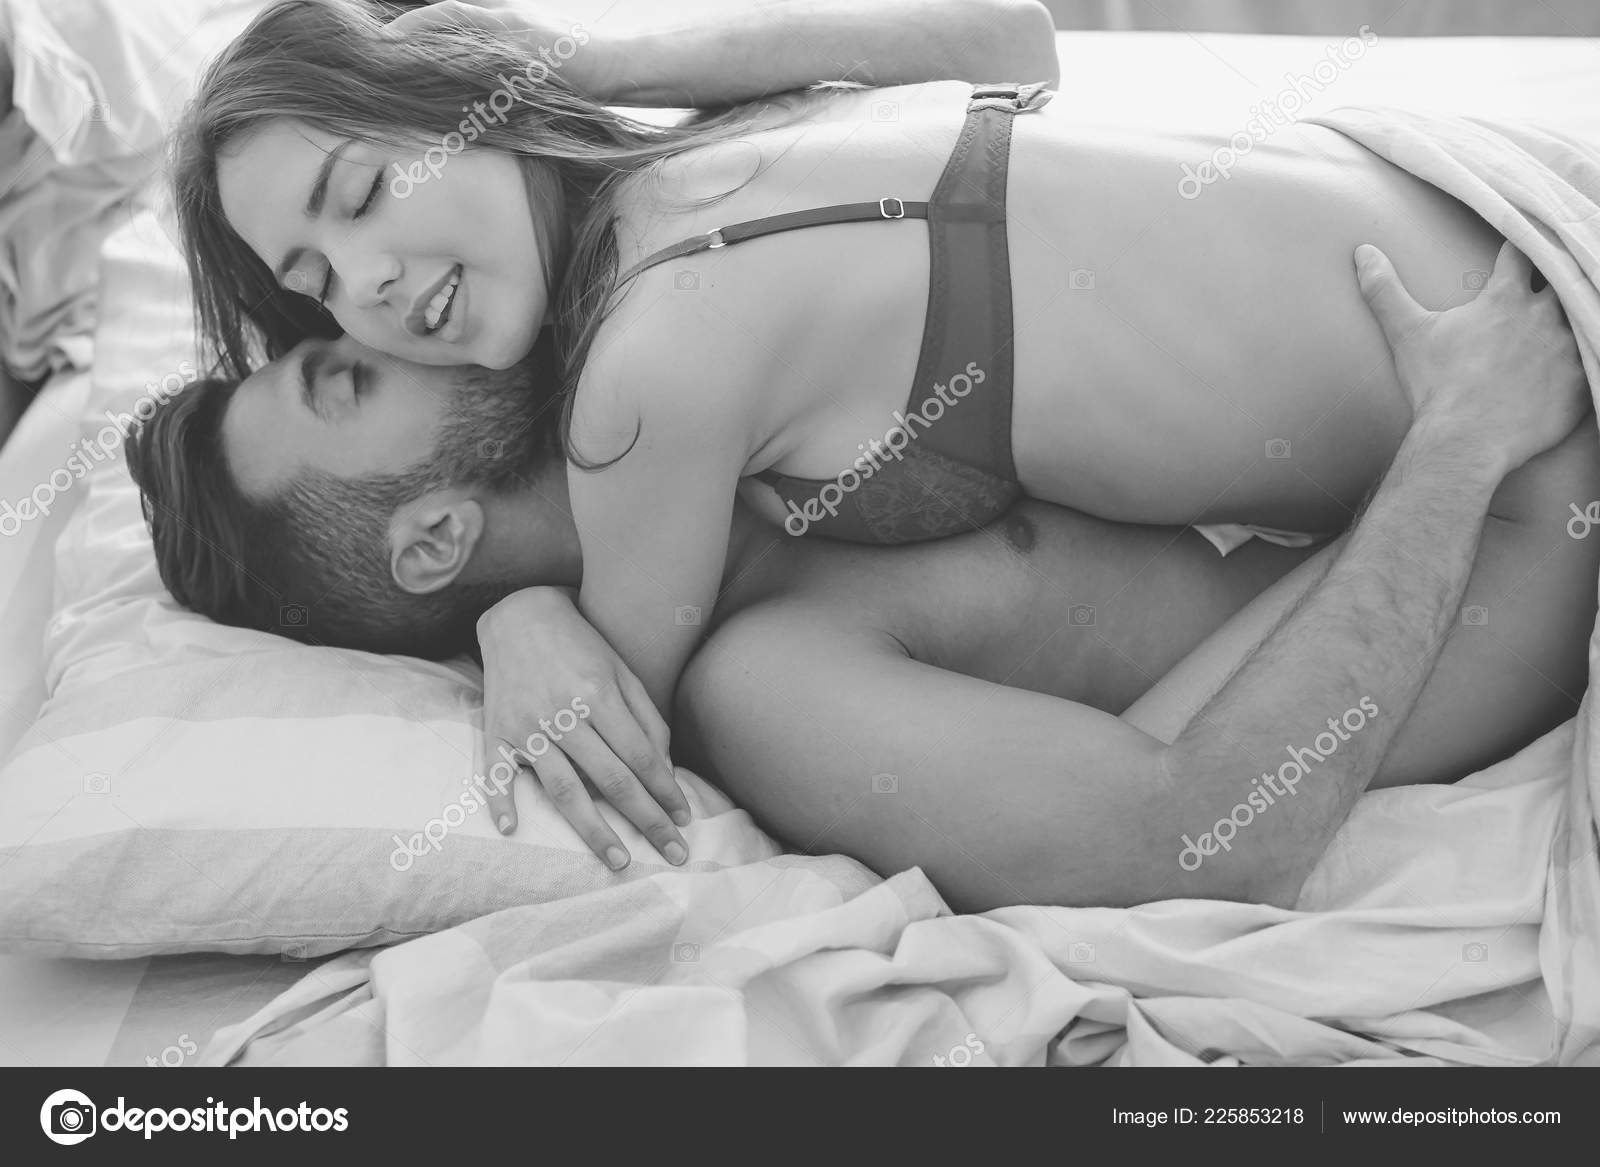 Black and wite pics of couples making love Beautiful Passionate Young Couple Having Sex Bed Home Intimate Sensual Stock Photo By C Alessandrobiascioli 225853218